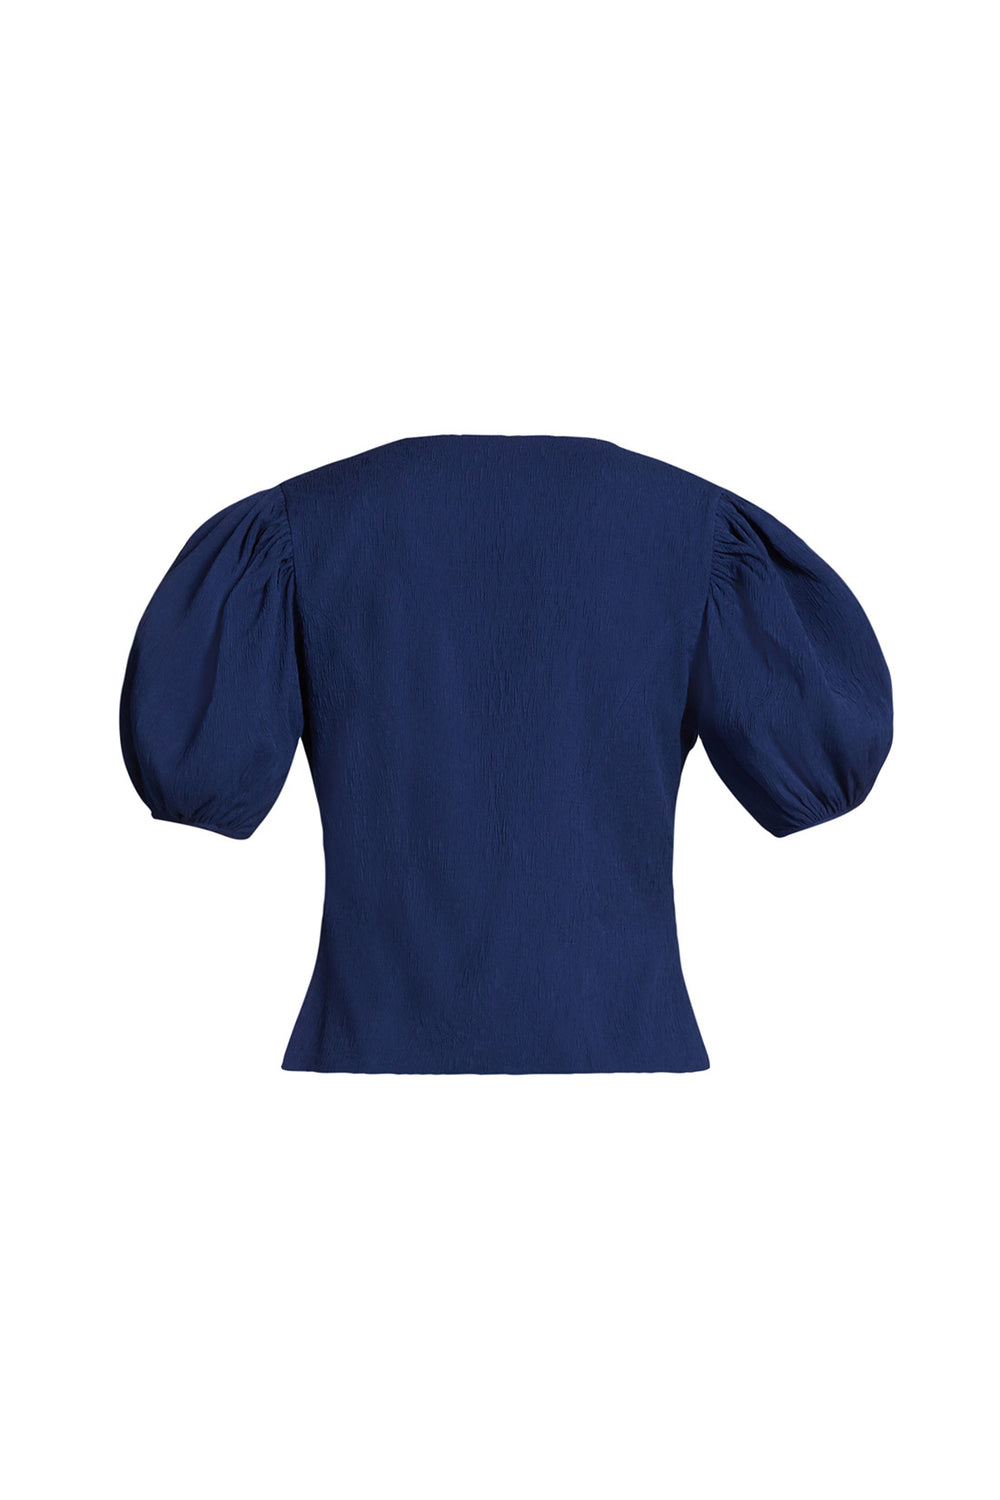 Load image into Gallery viewer, Puff-sleeve navy top